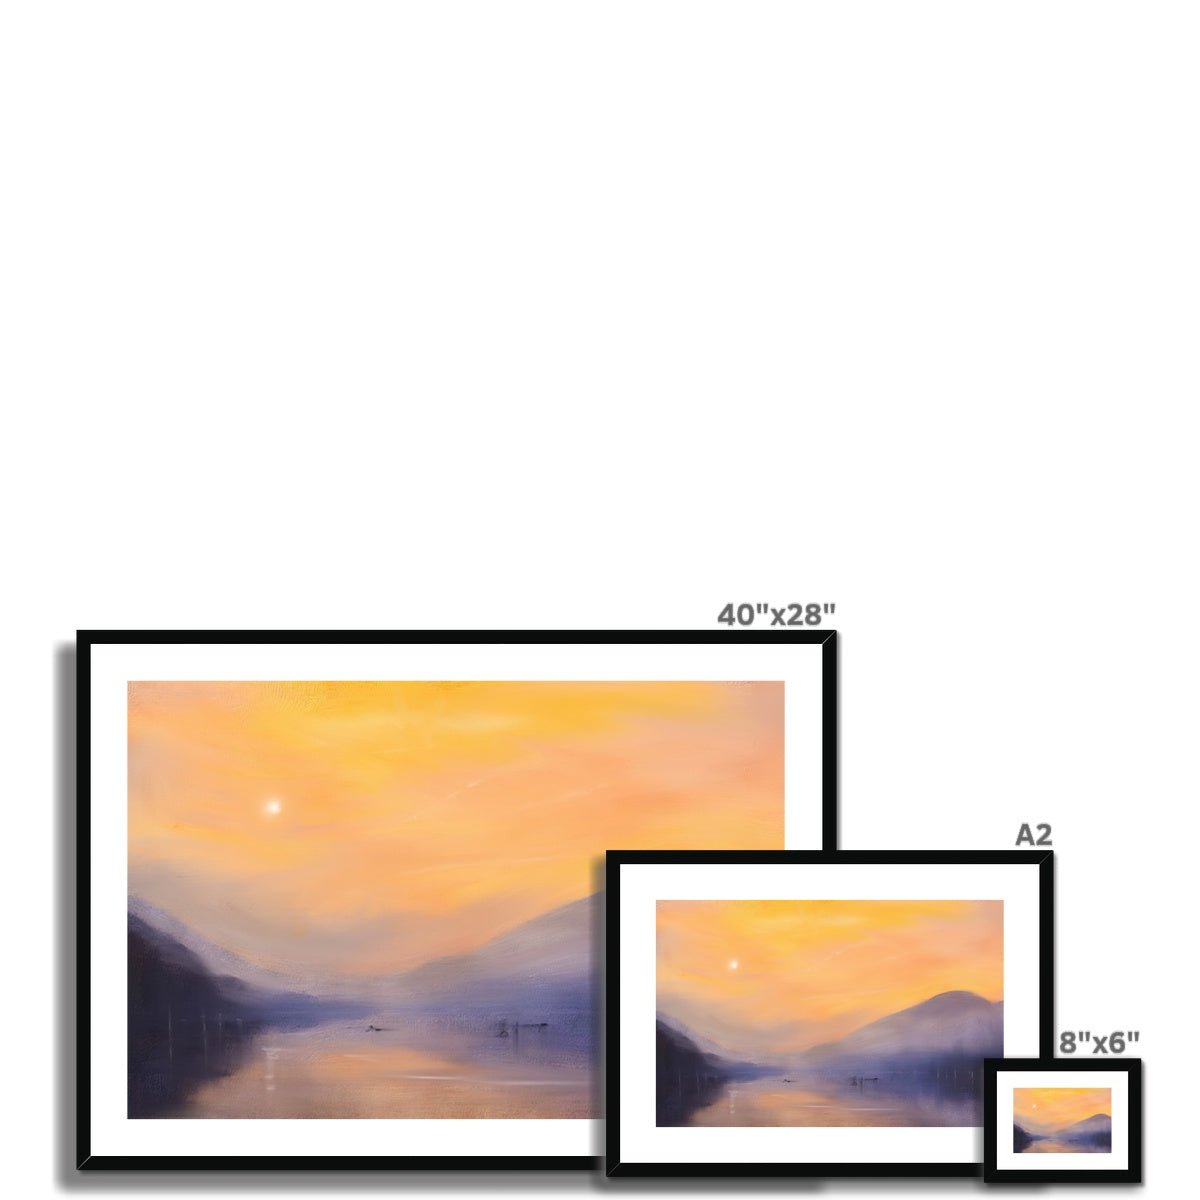 Loch Eck Dusk Painting | Framed & Mounted Prints From Scotland-Framed & Mounted Prints-Scottish Lochs & Mountains Art Gallery-Paintings, Prints, Homeware, Art Gifts From Scotland By Scottish Artist Kevin Hunter